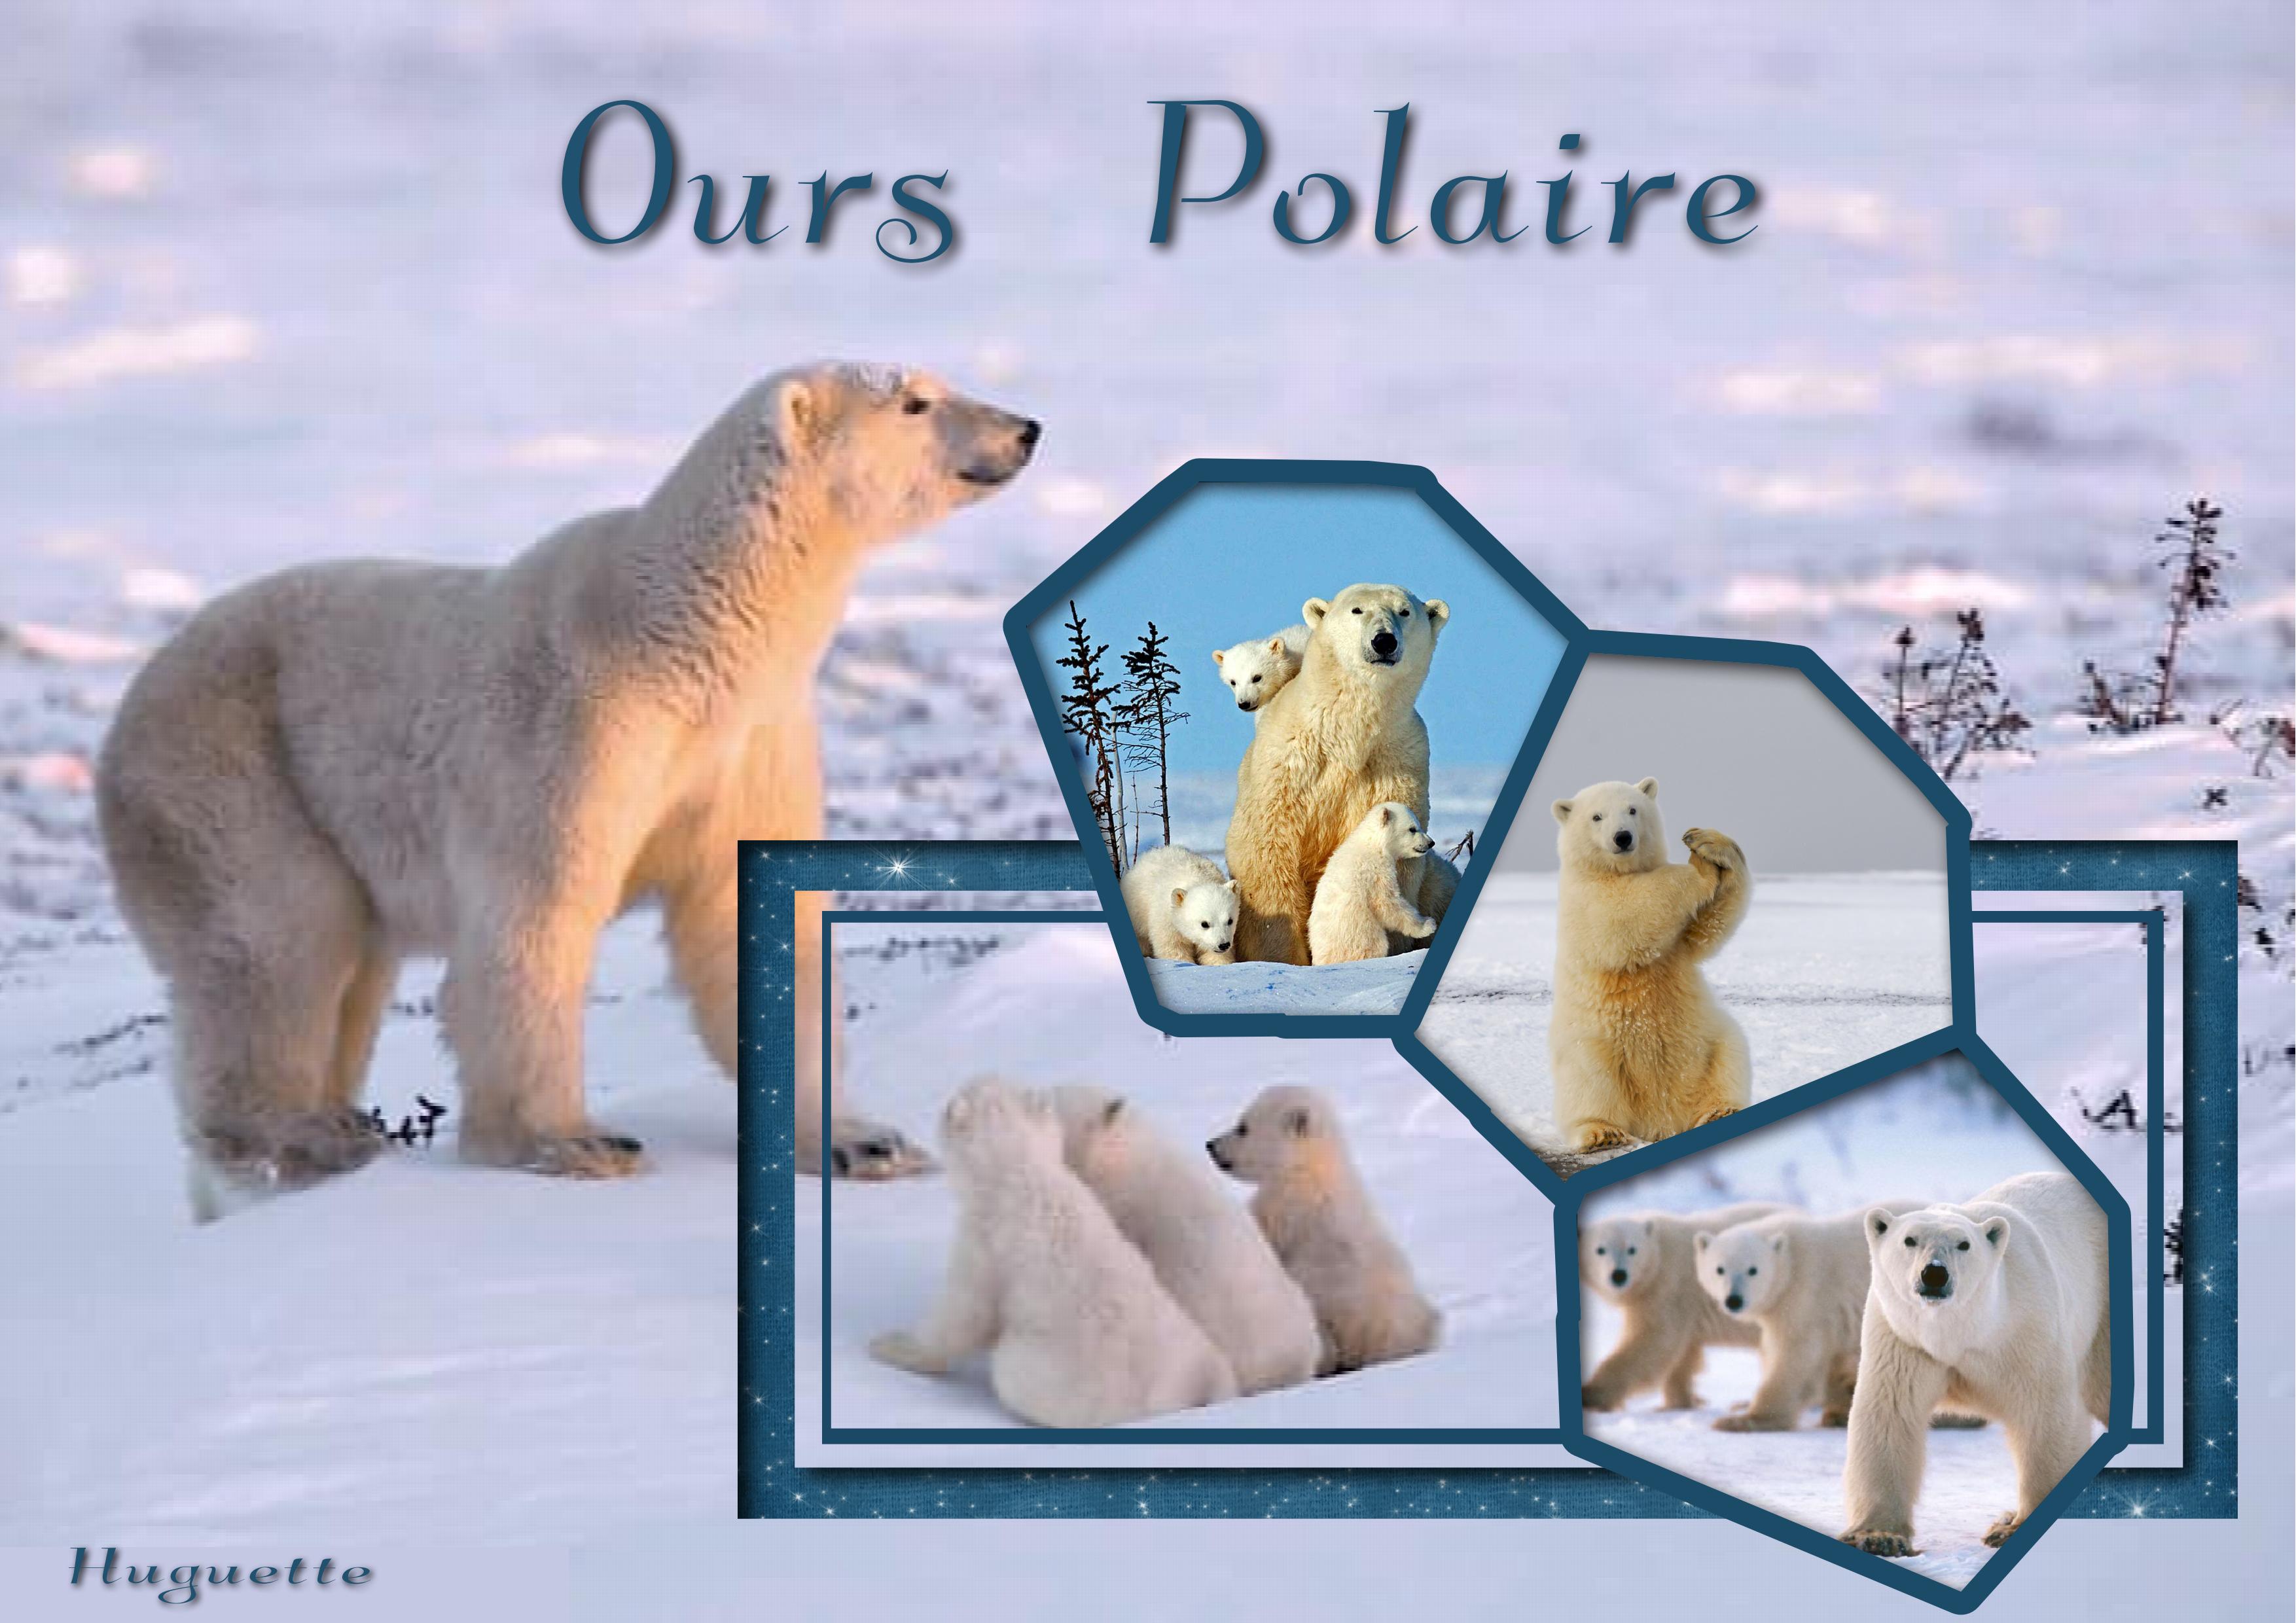 ours polaire  Huguette.jpg